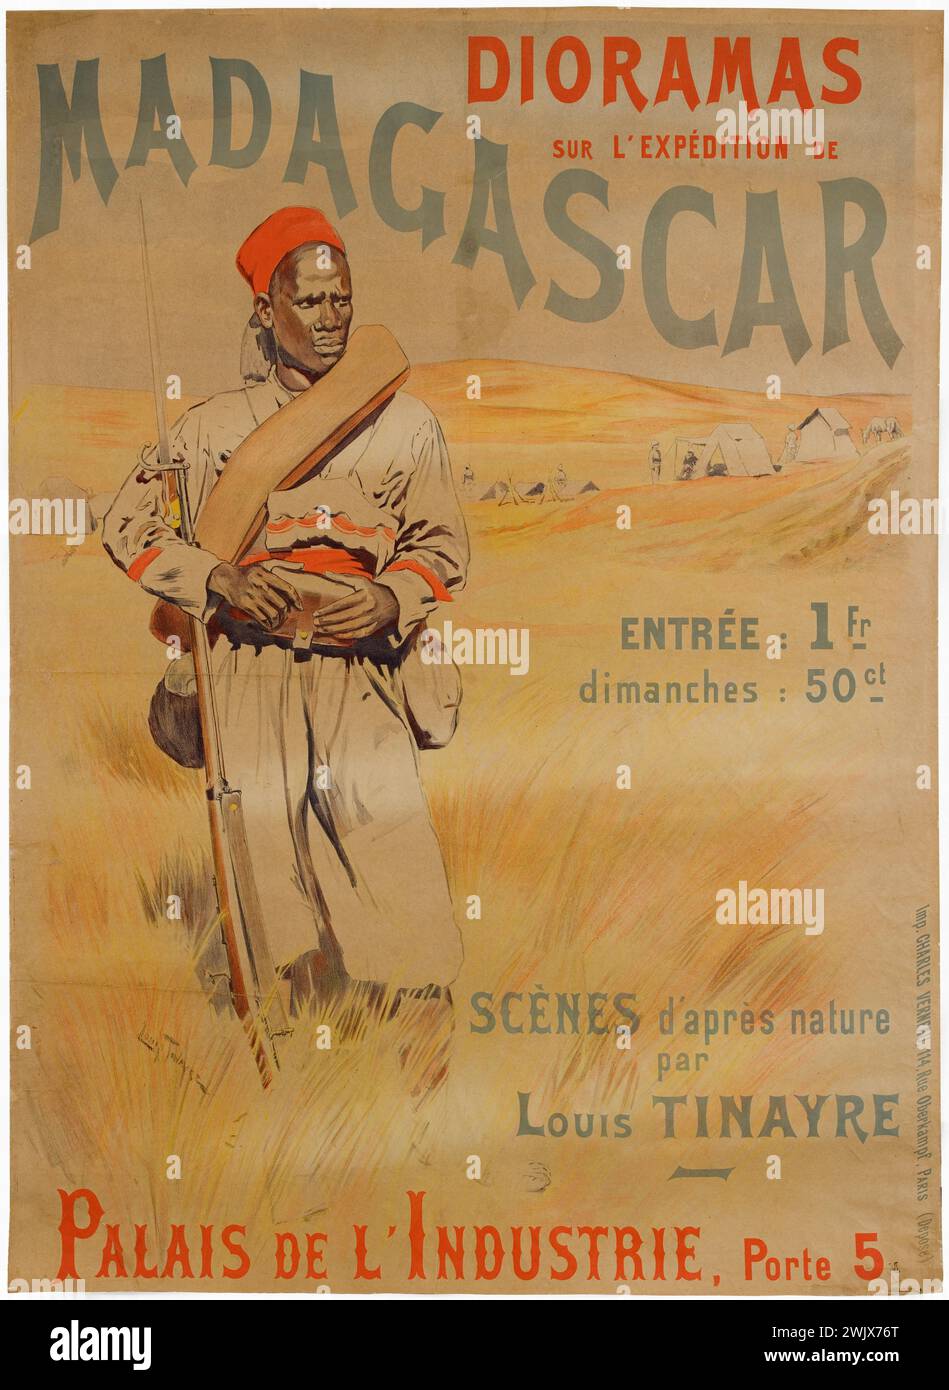 Dioramas on the expedition of Madagascar. Scenes after nature by Louis Tinayre '. Poster of Charles Verneau. General Leclerc Museum of Hauteclocque and the Liberation of Paris, Jean Moulin Museum. Poster, French conquest, diorama, industry palace, Senegalese rifleman, Expedition Stock Photo